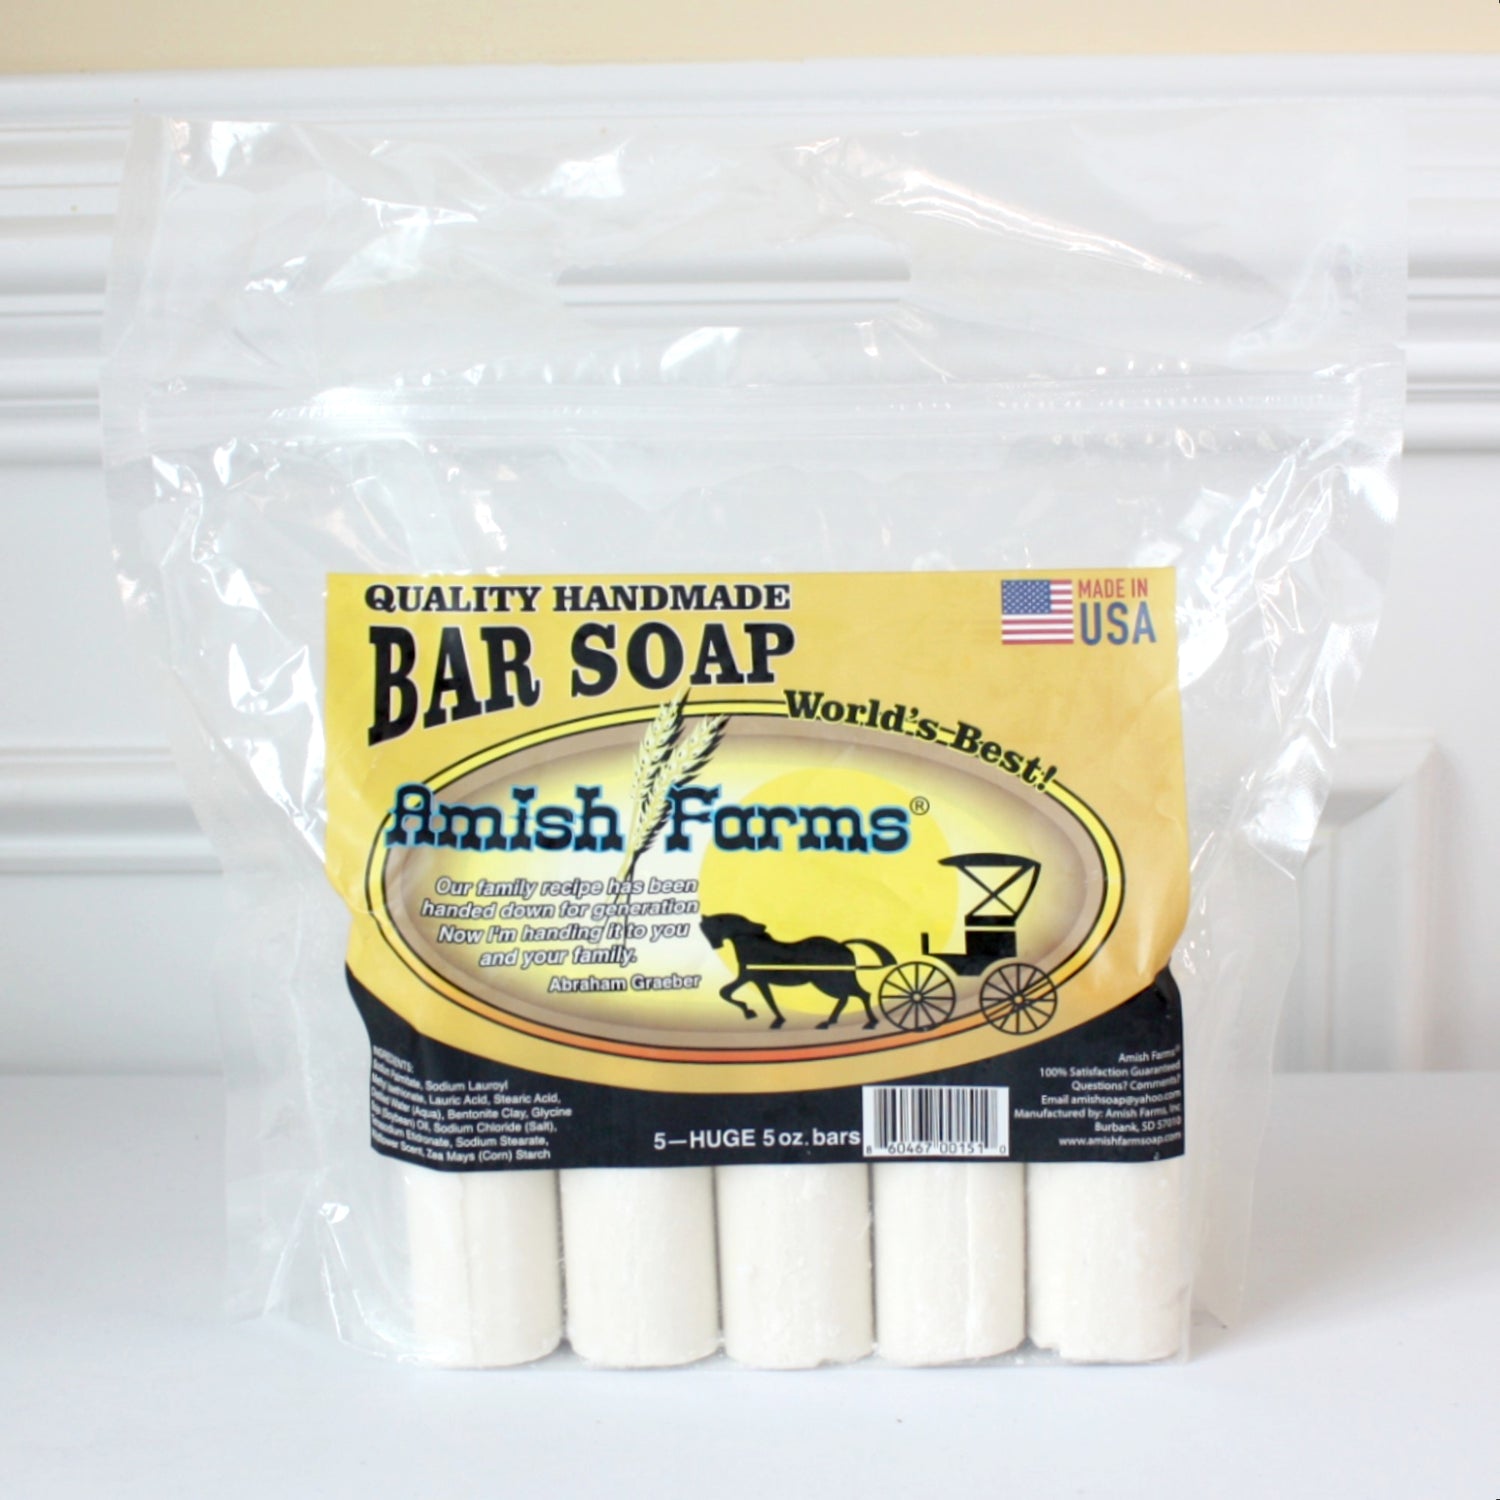 Amish Farms Soap 5 Bar Bags: Handcrafted, all-natural ingredients, moisturizing, gentle for sensitive skin, perfect gift.